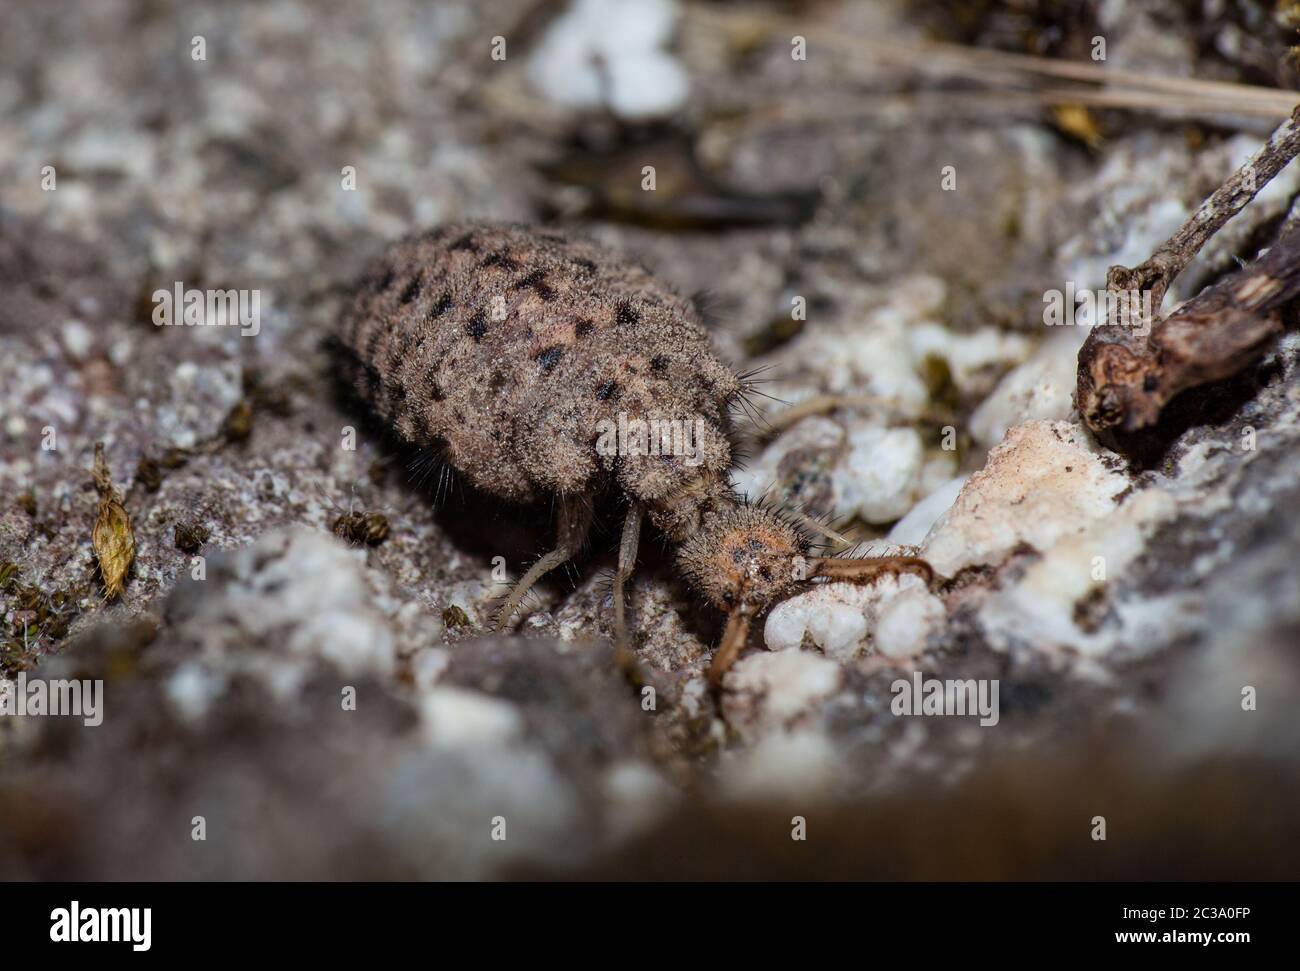 Close-up of an antlion larva on the ground Stock Photo